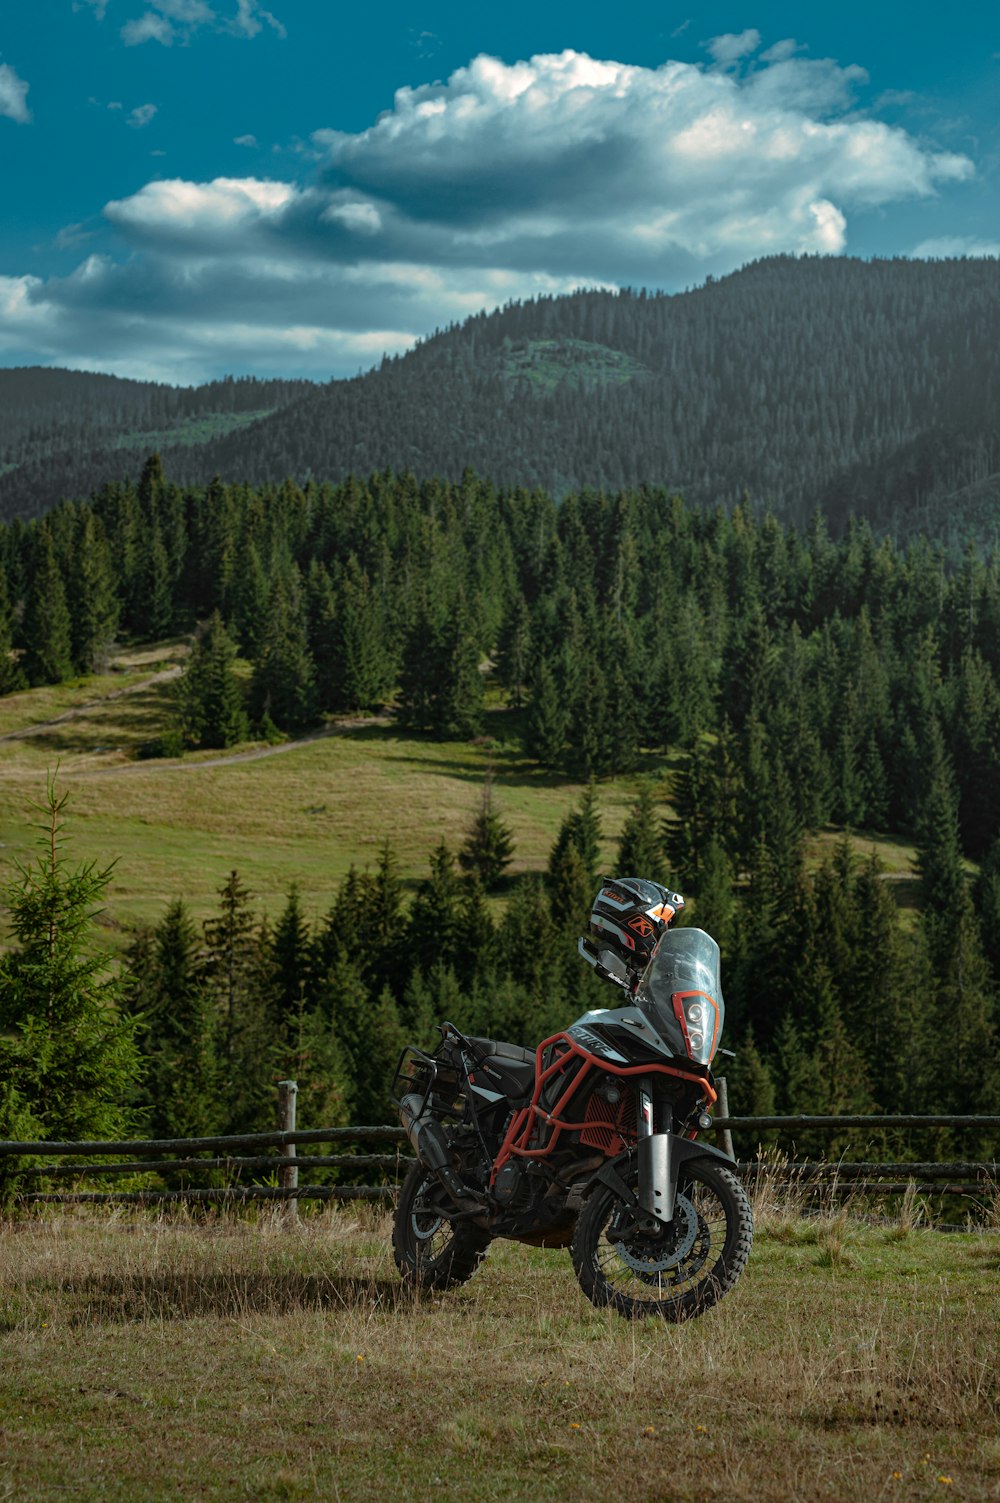 a motorcycle parked in a field with a mountain in the background